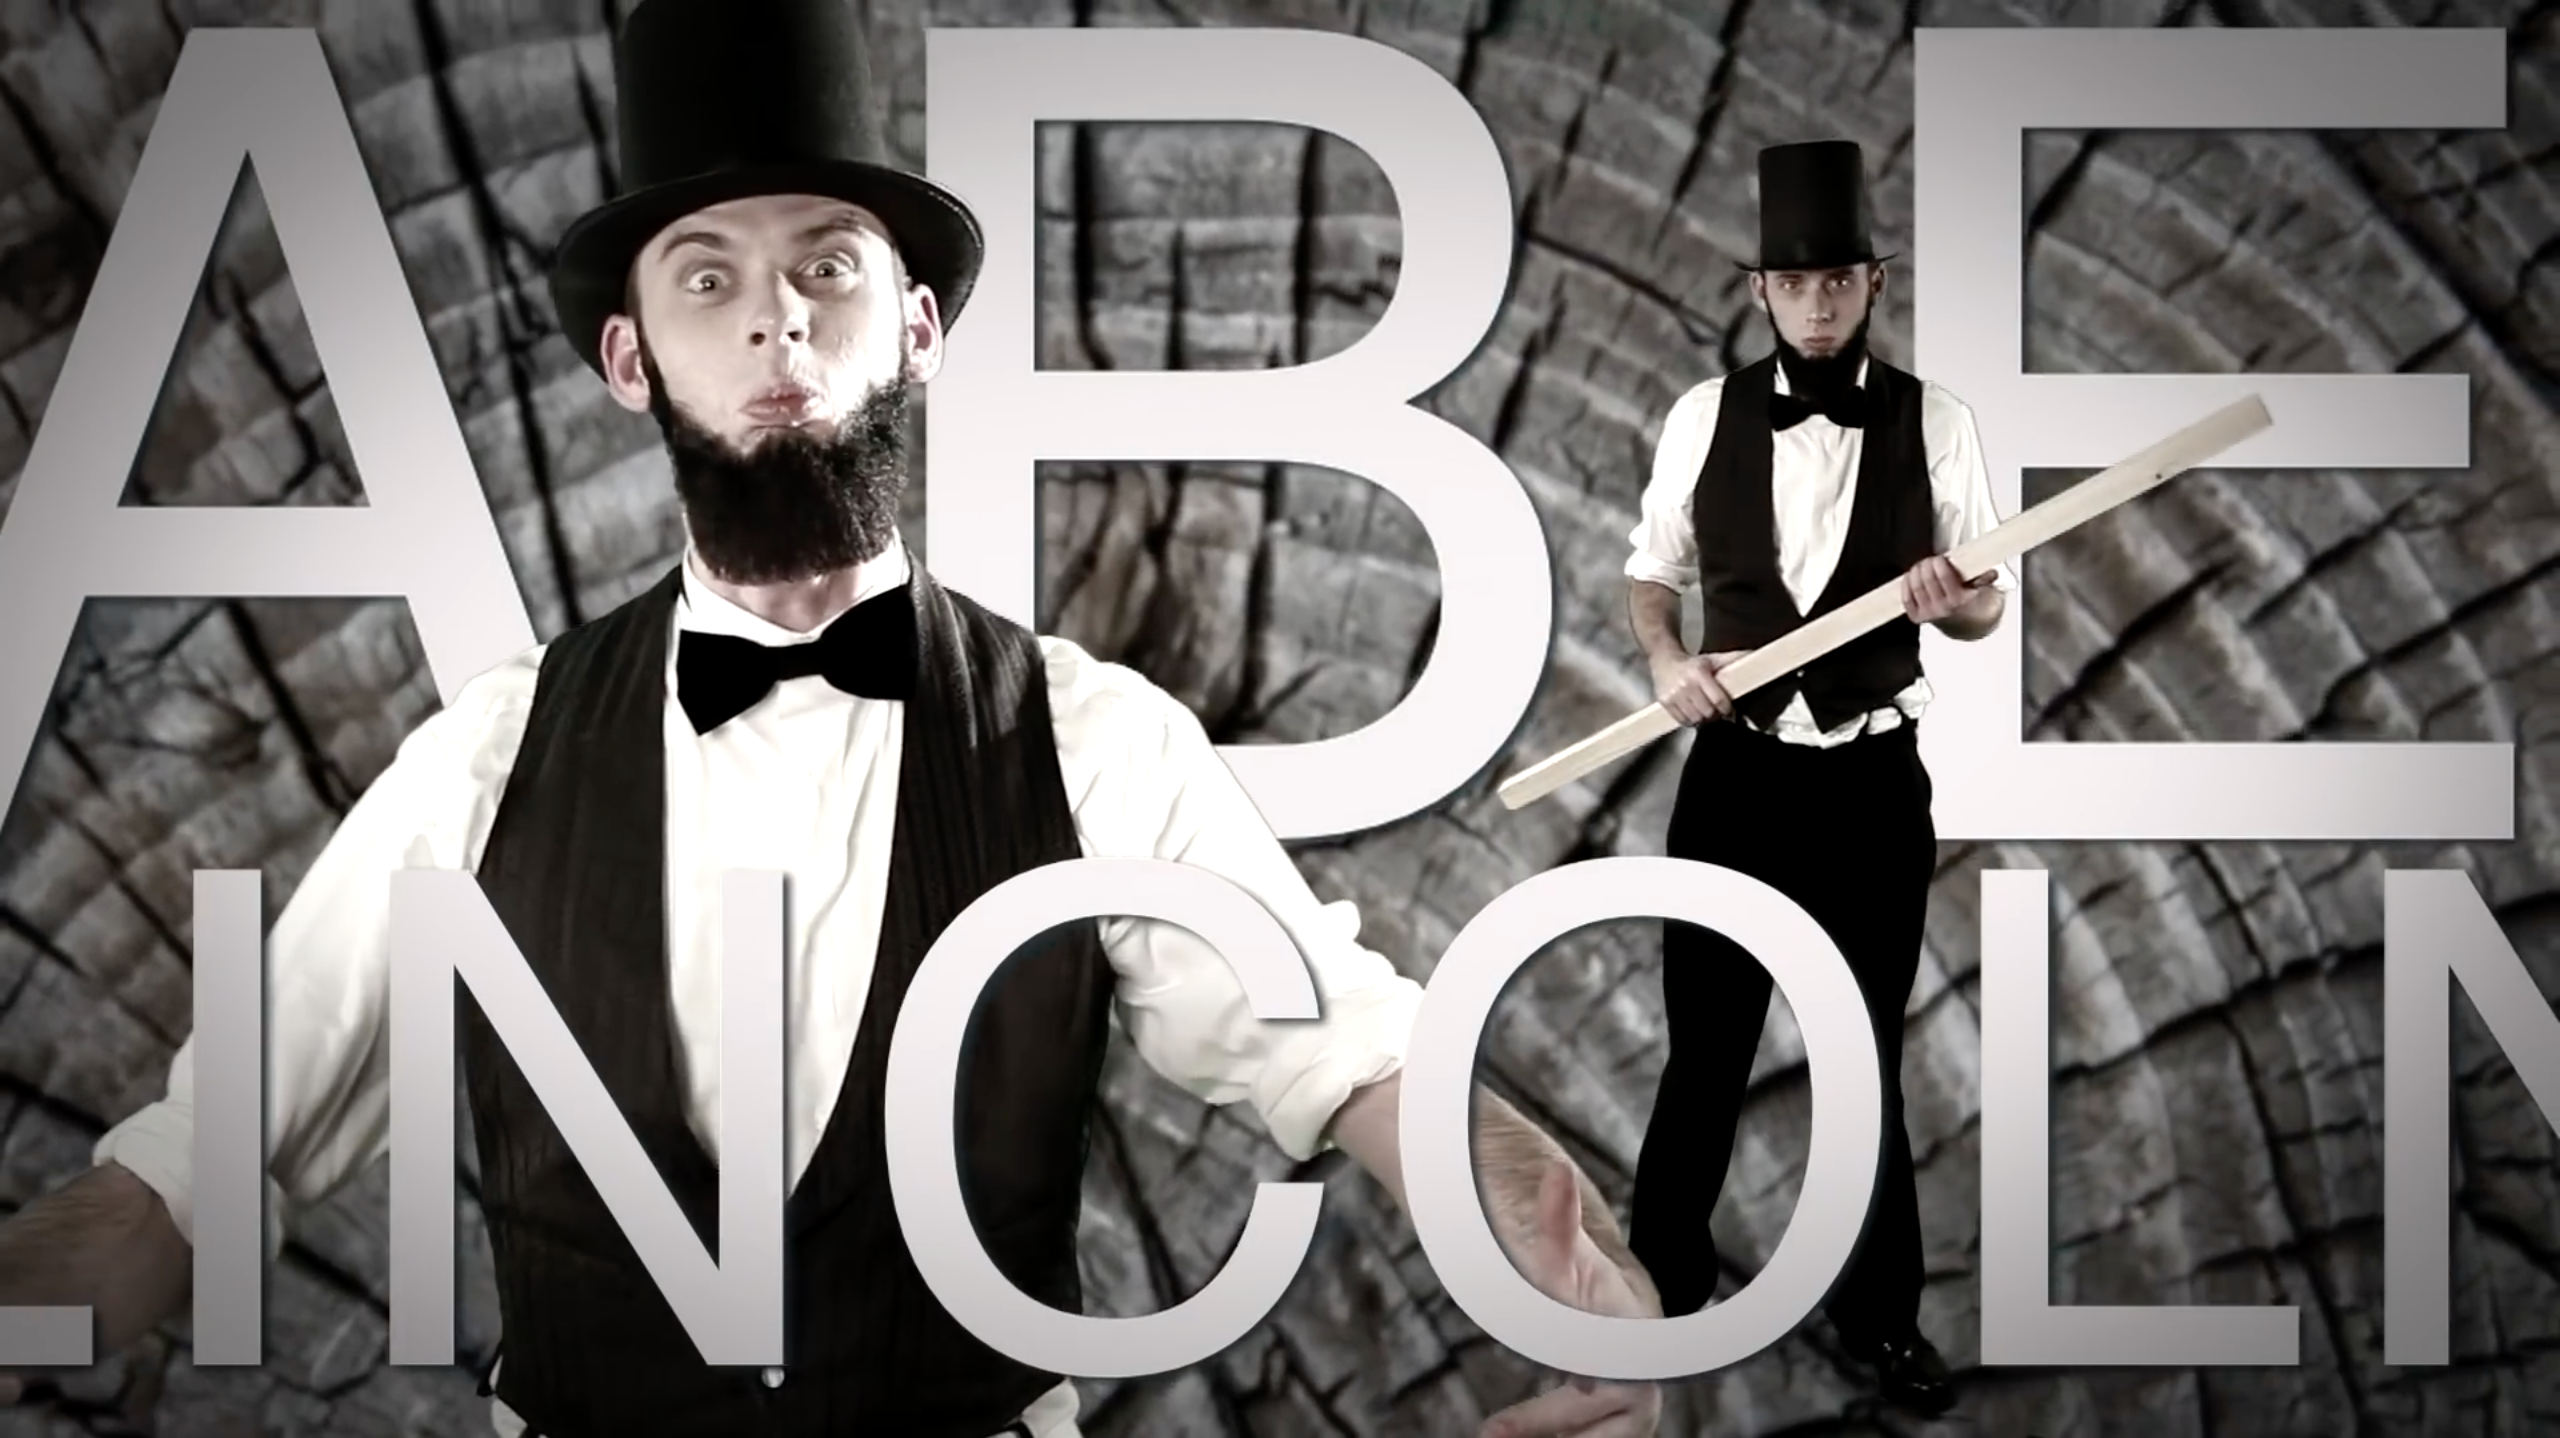 Abe Lincoln - Epic Rap Battles of History Wiki2560 x 1438